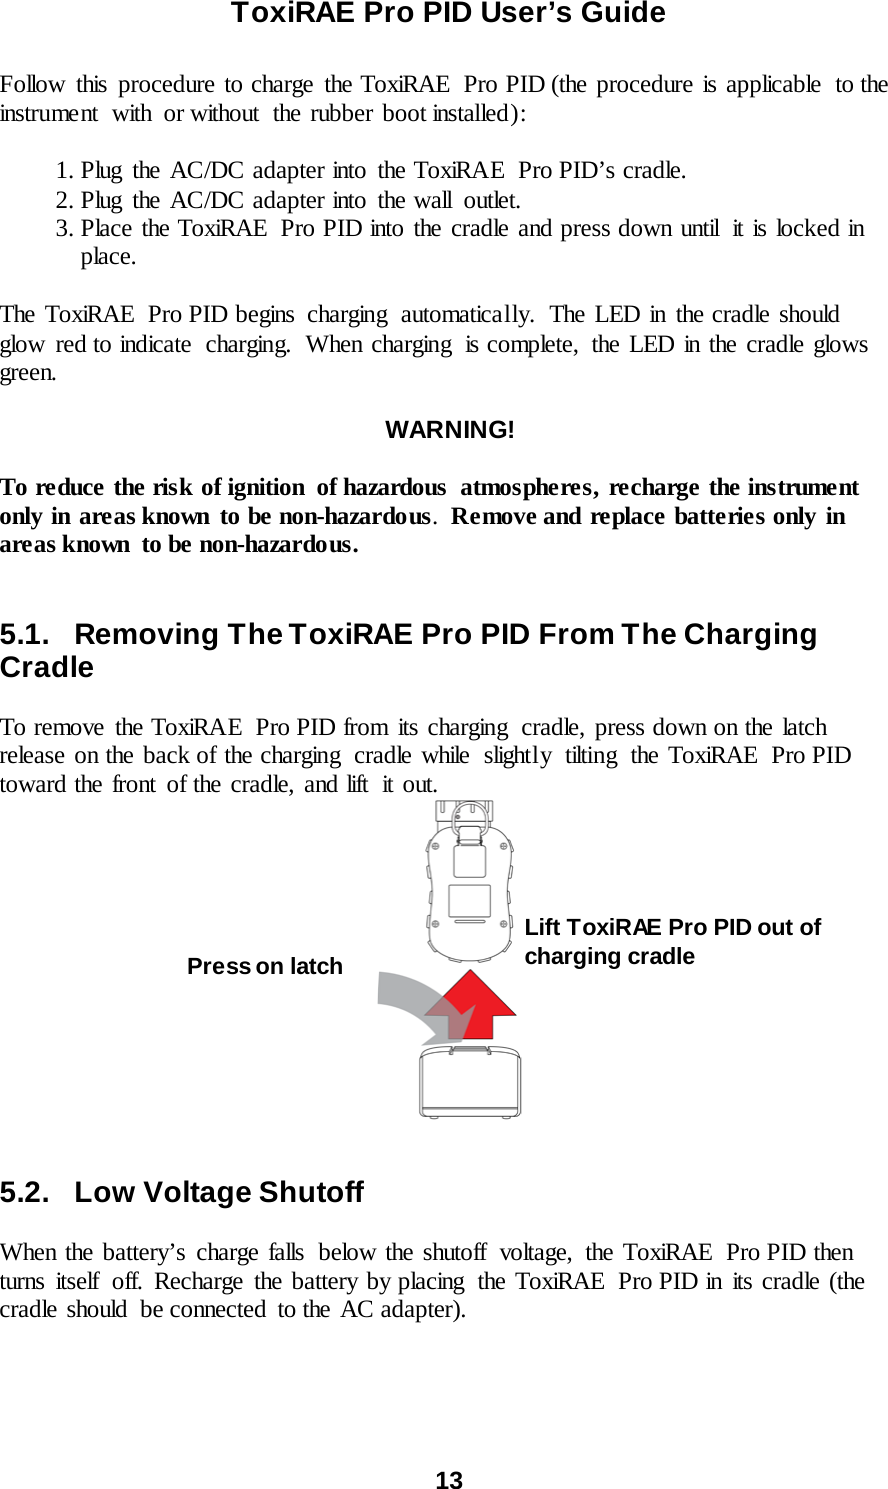 ToxiRAE Pro PID User’s Guide  13   Follow this procedure to charge the ToxiRAE  Pro PID (the procedure is applicable  to the instrument  with  or without  the rubber boot installed):   1. Plug the AC/DC adapter into the ToxiRAE  Pro PID’s cradle.  2. Plug the AC/DC adapter into the wall  outlet.  3. Place the ToxiRAE  Pro PID into the cradle and press down until  it is locked in place.  The ToxiRAE  Pro PID begins charging  automatically.  The LED in the cradle should glow  red to indicate  charging. When charging  is complete, the LED in the cradle glows green.  WARNING!  To reduce the risk of ignition  of hazardous  atmospheres, recharge the instrument only in areas known to be non-hazardous.  Remove and replace batteries only in areas known  to be non-hazardous.   5.1. Removing The ToxiRAE Pro PID From The Charging  Cradle  To remove the ToxiRAE Pro PID from its charging  cradle, press down on the latch release on the back of the charging cradle while slightly tilting the ToxiRAE  Pro PID toward the front of the cradle, and lift it out.    5.2. Low Voltage Shutoff  When the battery’s charge falls  below the shutoff  voltage,  the ToxiRAE  Pro PID then turns itself off. Recharge the battery by placing the ToxiRAE  Pro PID in its cradle (the cradle should  be connected  to the AC adapter).   Press on latch Lift ToxiRAE Pro PID out of charging cradle 